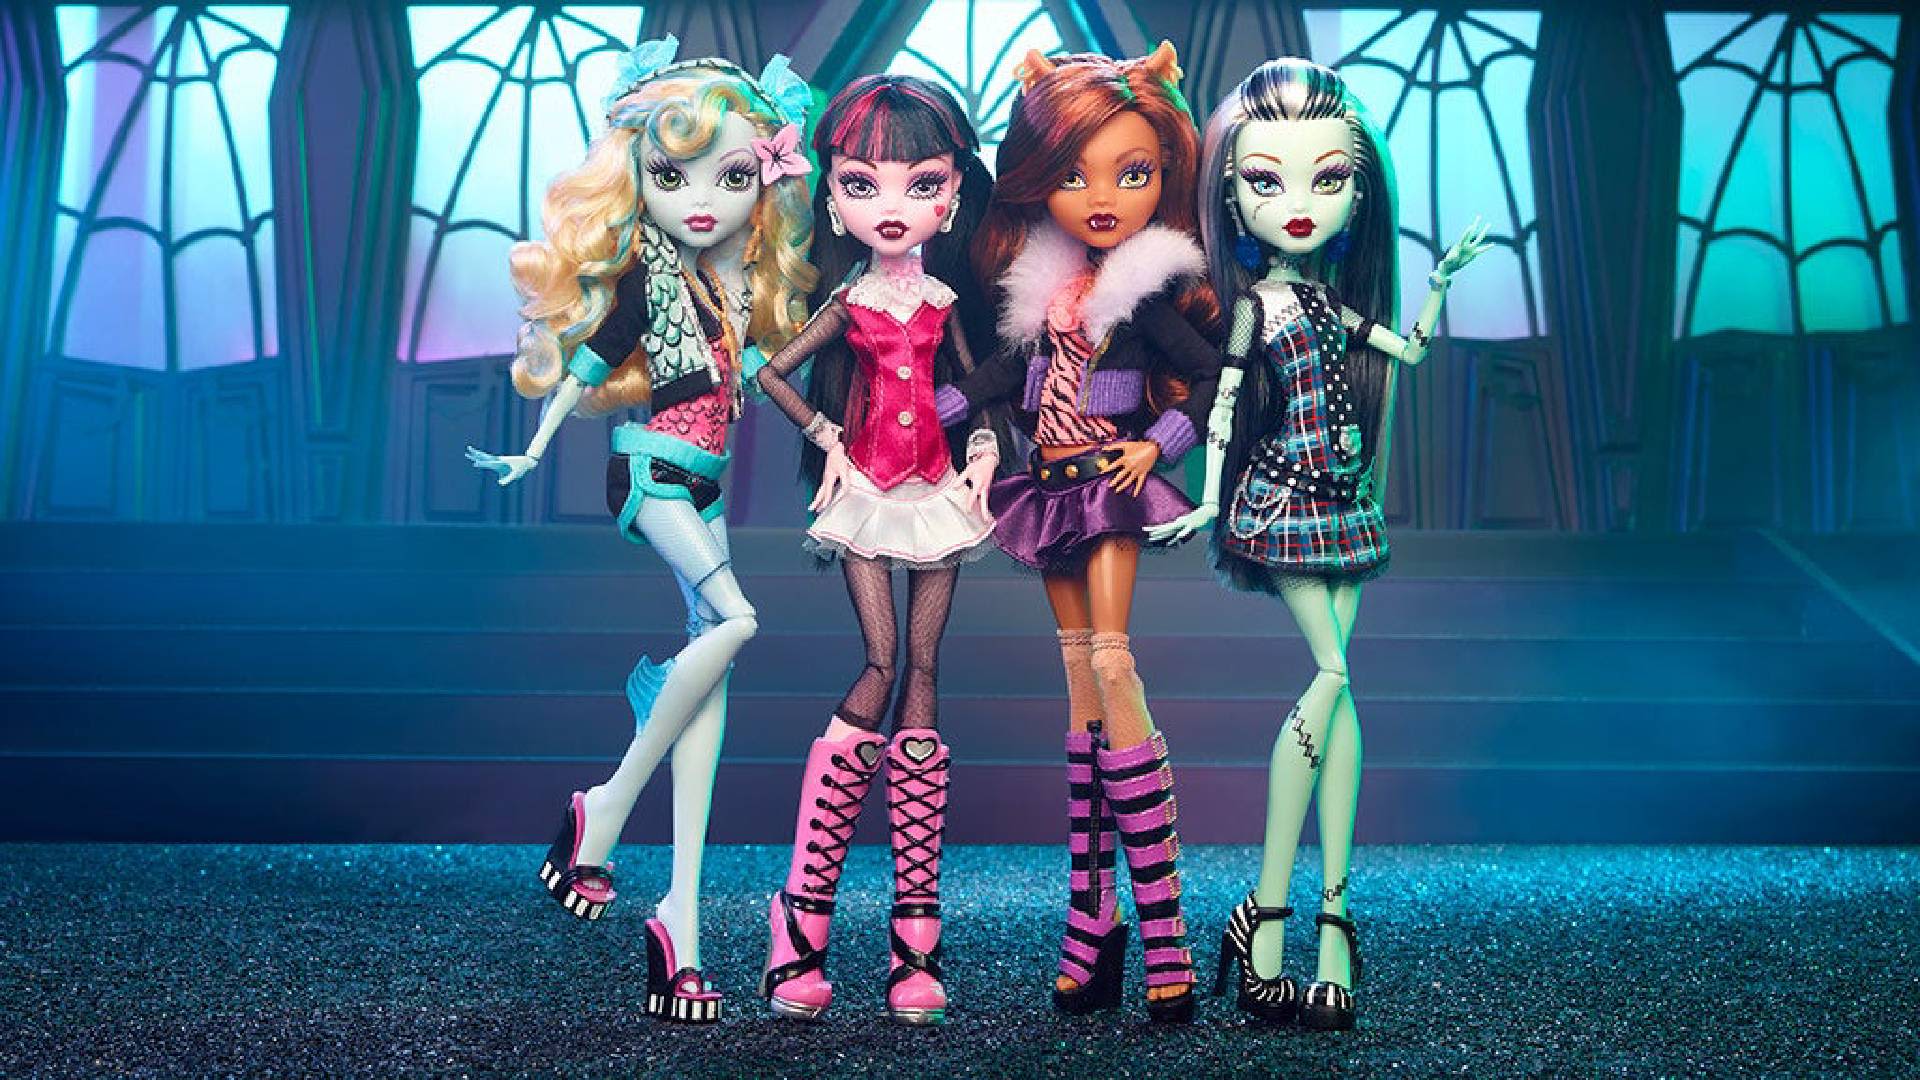 Move out of the way Barbie, another doll is getting a live-action movie from a surprising writer